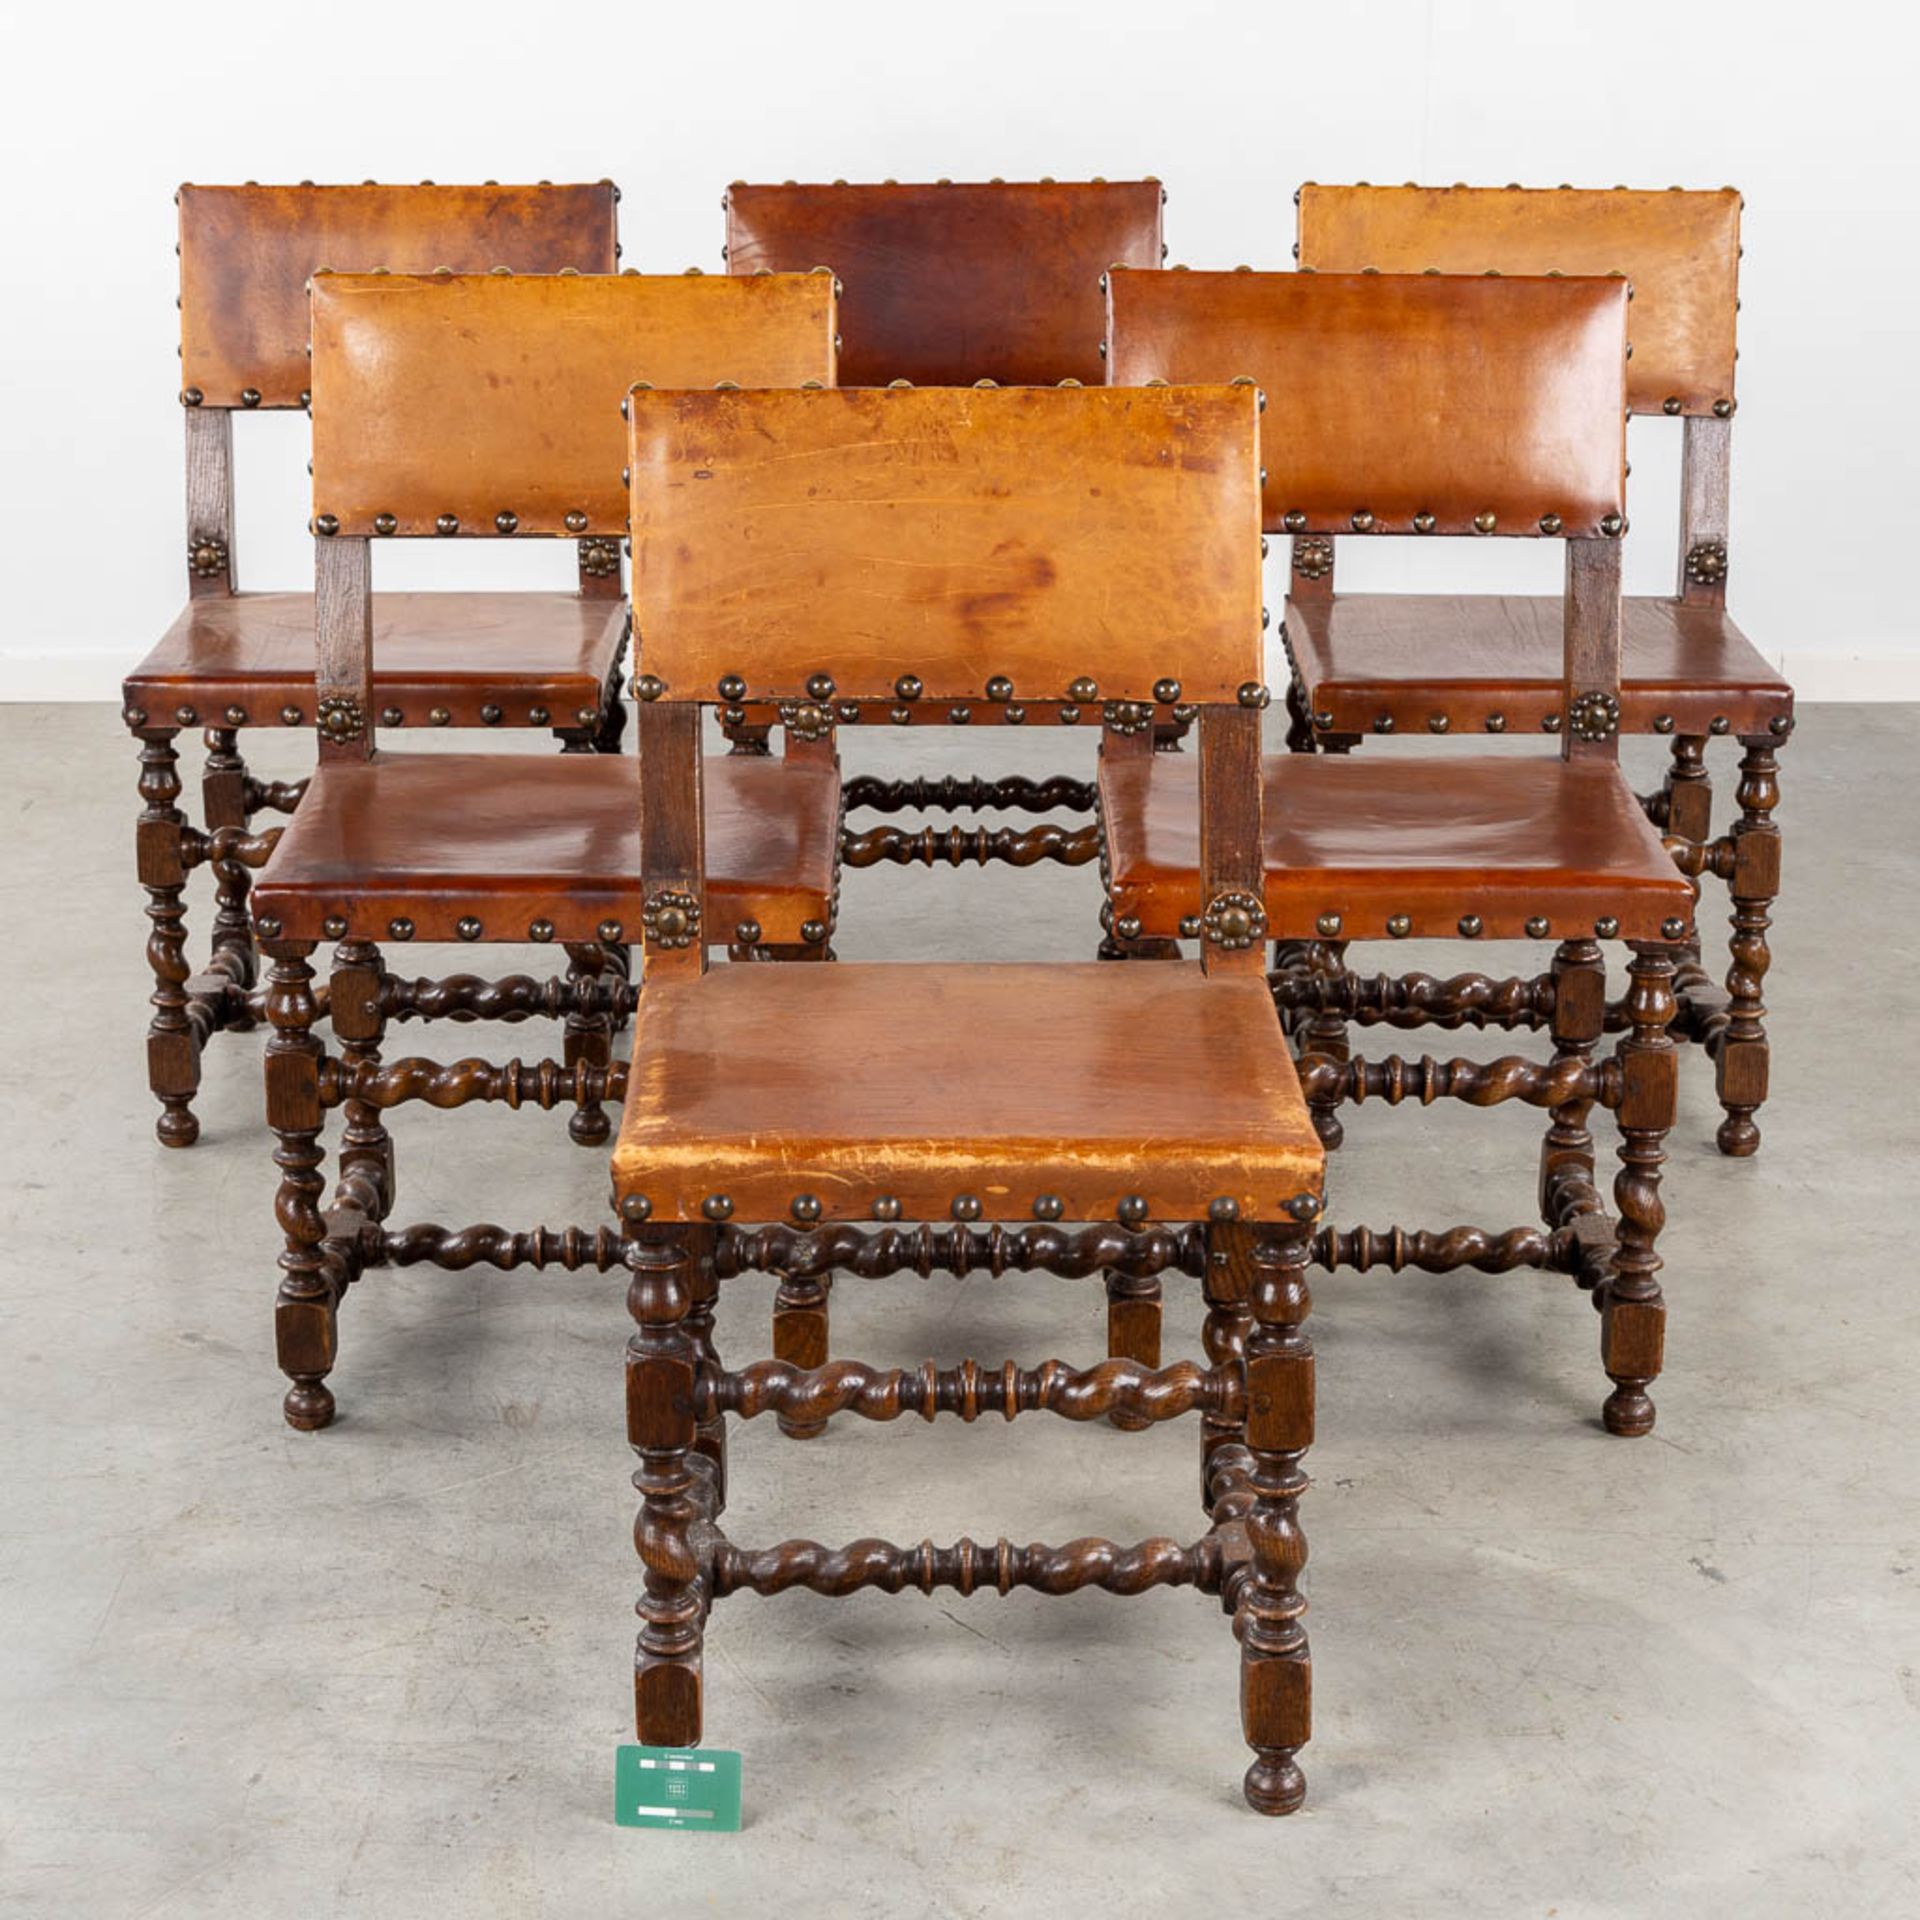 A matching set of 6 chairs, wood and leather. (L:47 x W:45 x H:90 cm) - Bild 2 aus 12